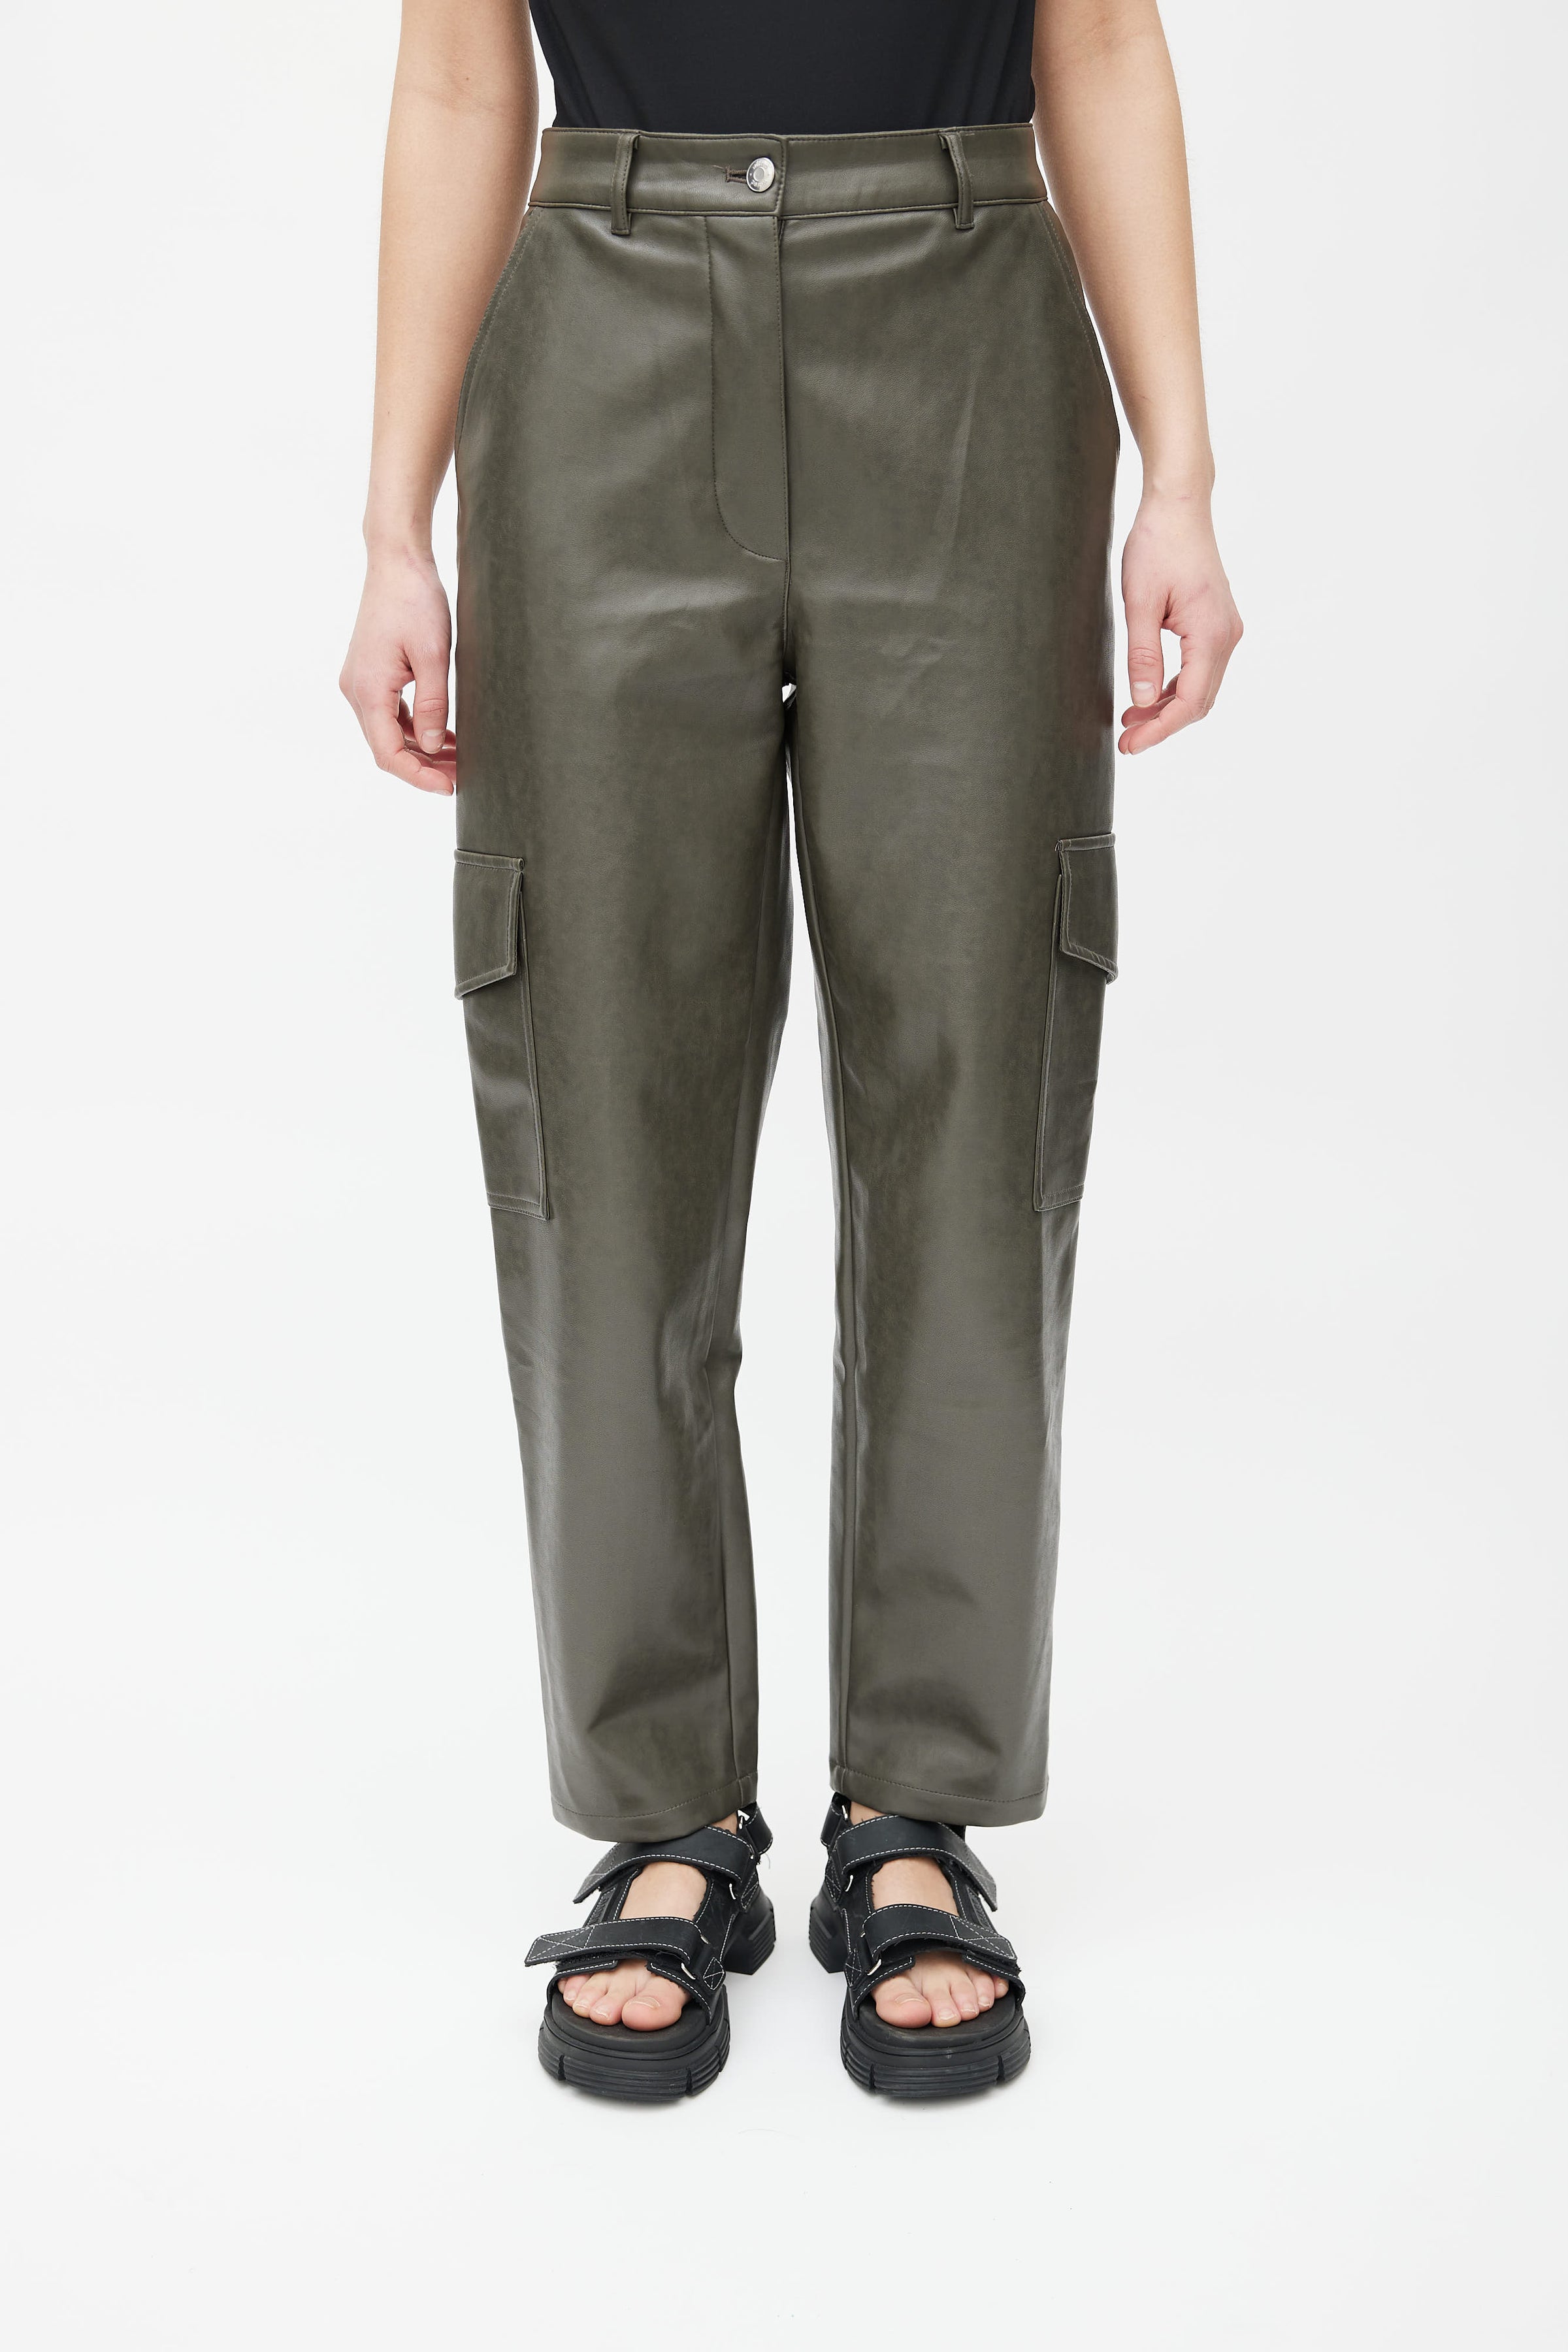 Aritzia WILFRED FREE modern cargo pant Color  Depop